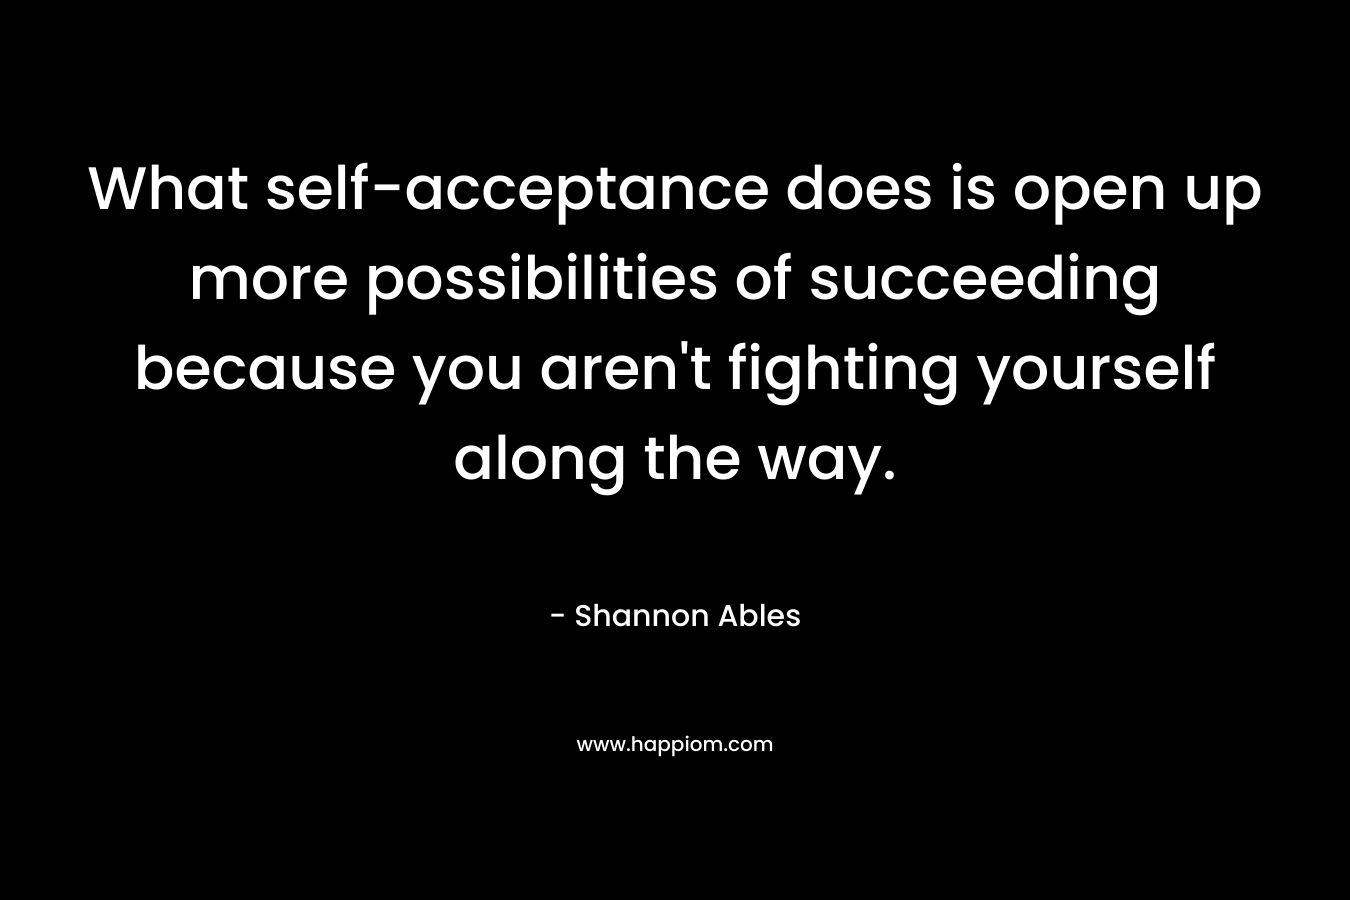 What self-acceptance does is open up more possibilities of succeeding because you aren’t fighting yourself along the way. – Shannon Ables